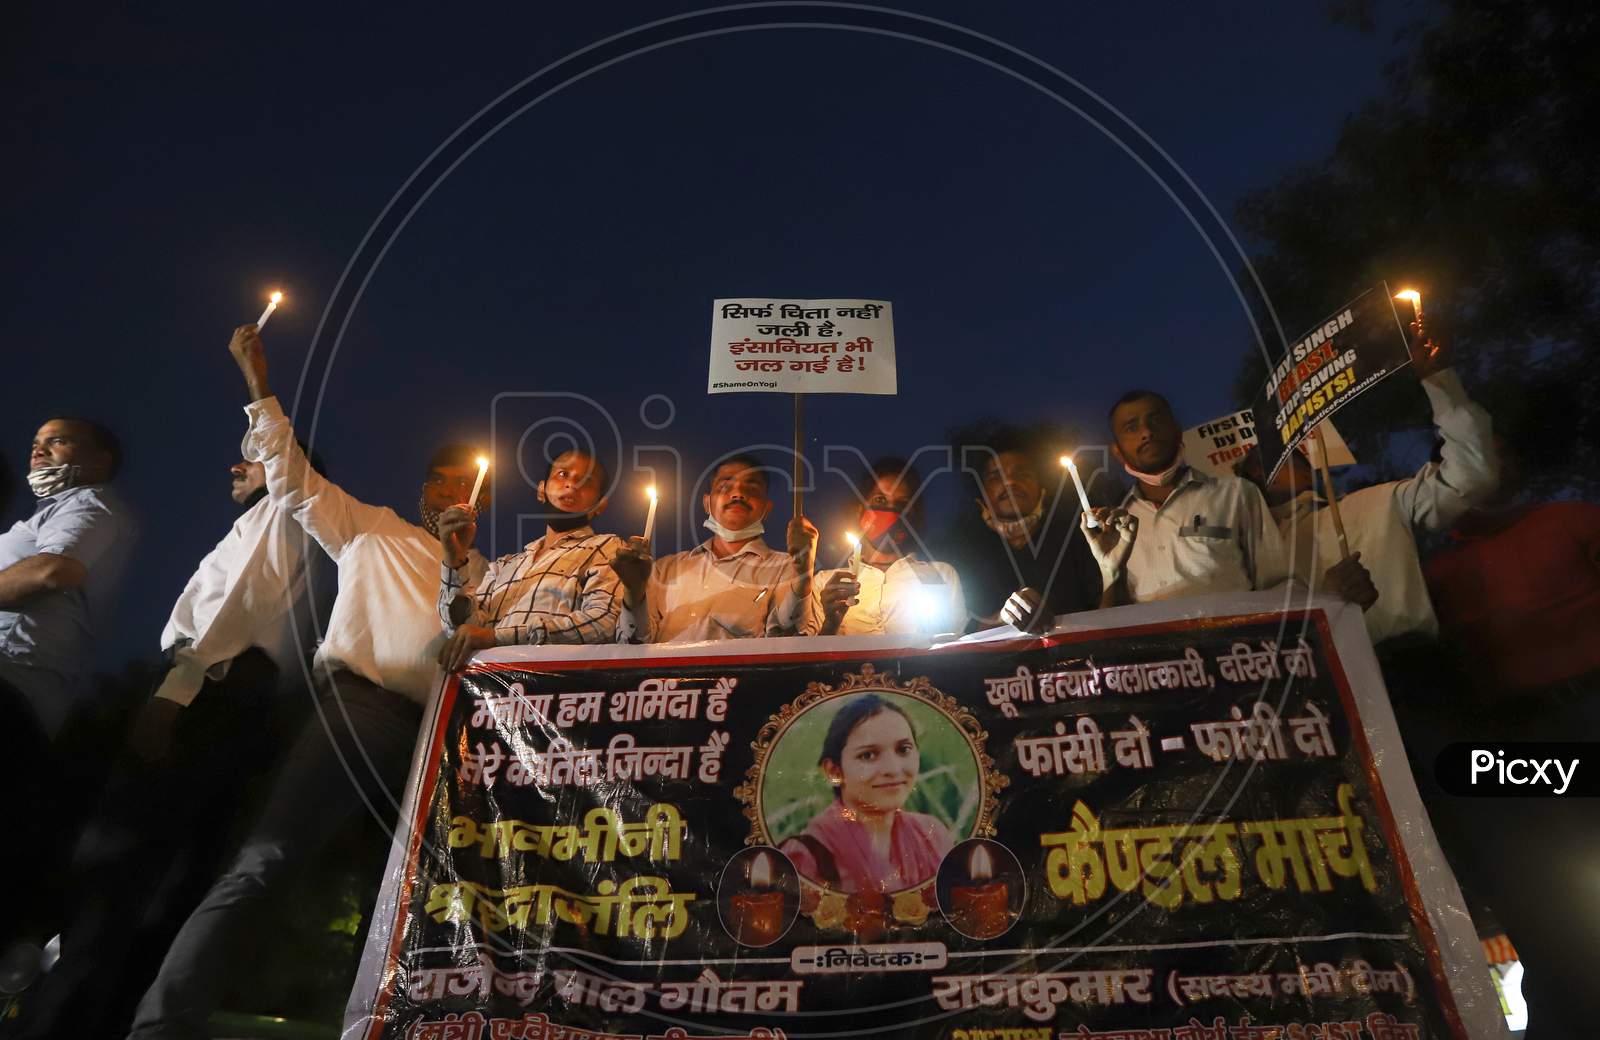 Members of various political bodies protest demanding justice for Hathras gang-rape victim, at Jantar Mantar, on October 2, 2020 in New Delhi, India.